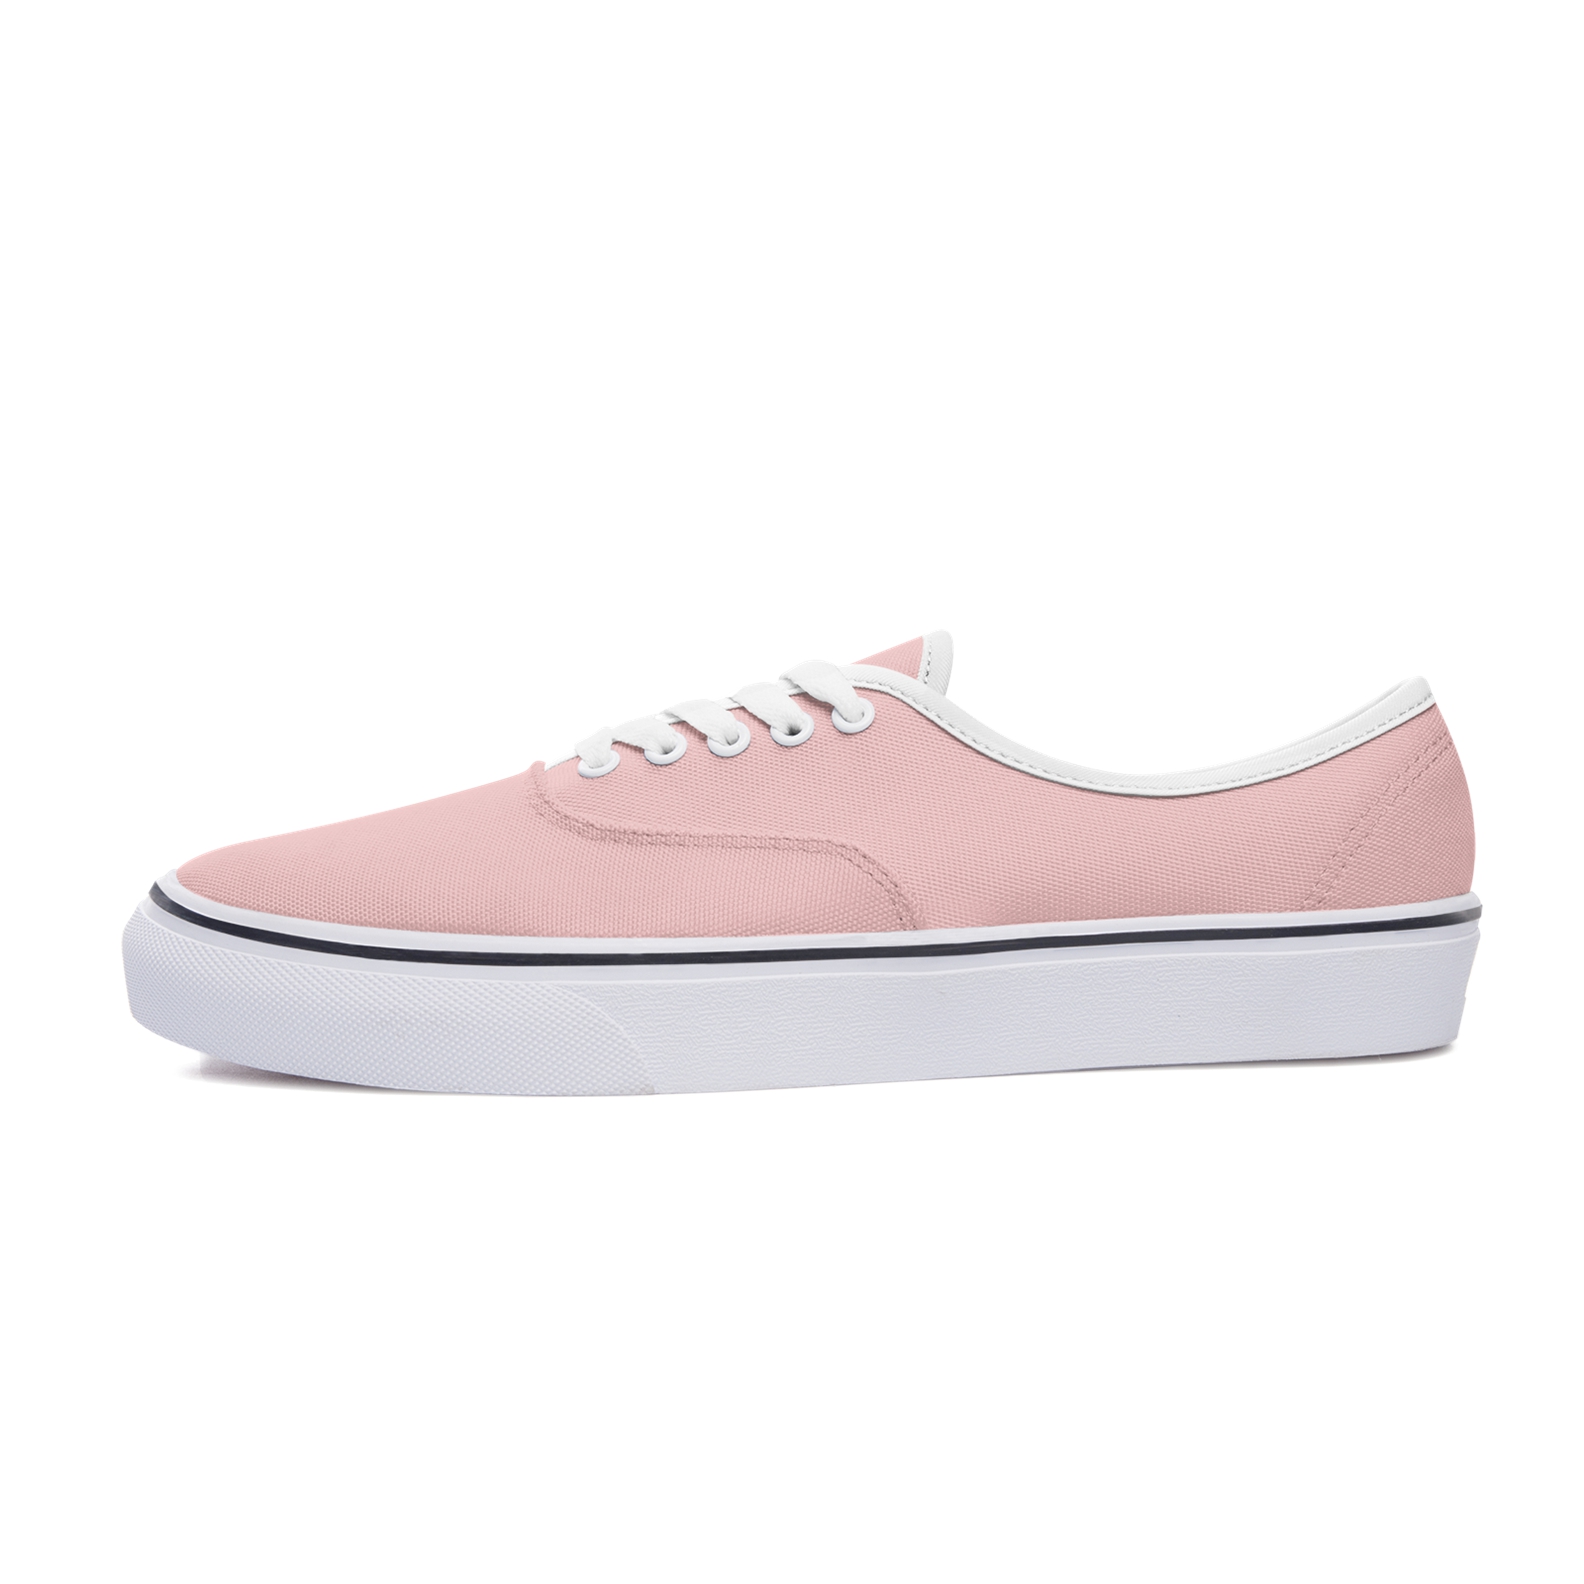 Women's Fashion solid color  Sneaker Low Top Casual Walking Shoes Classic Comfort Flat Fashion Sneakers